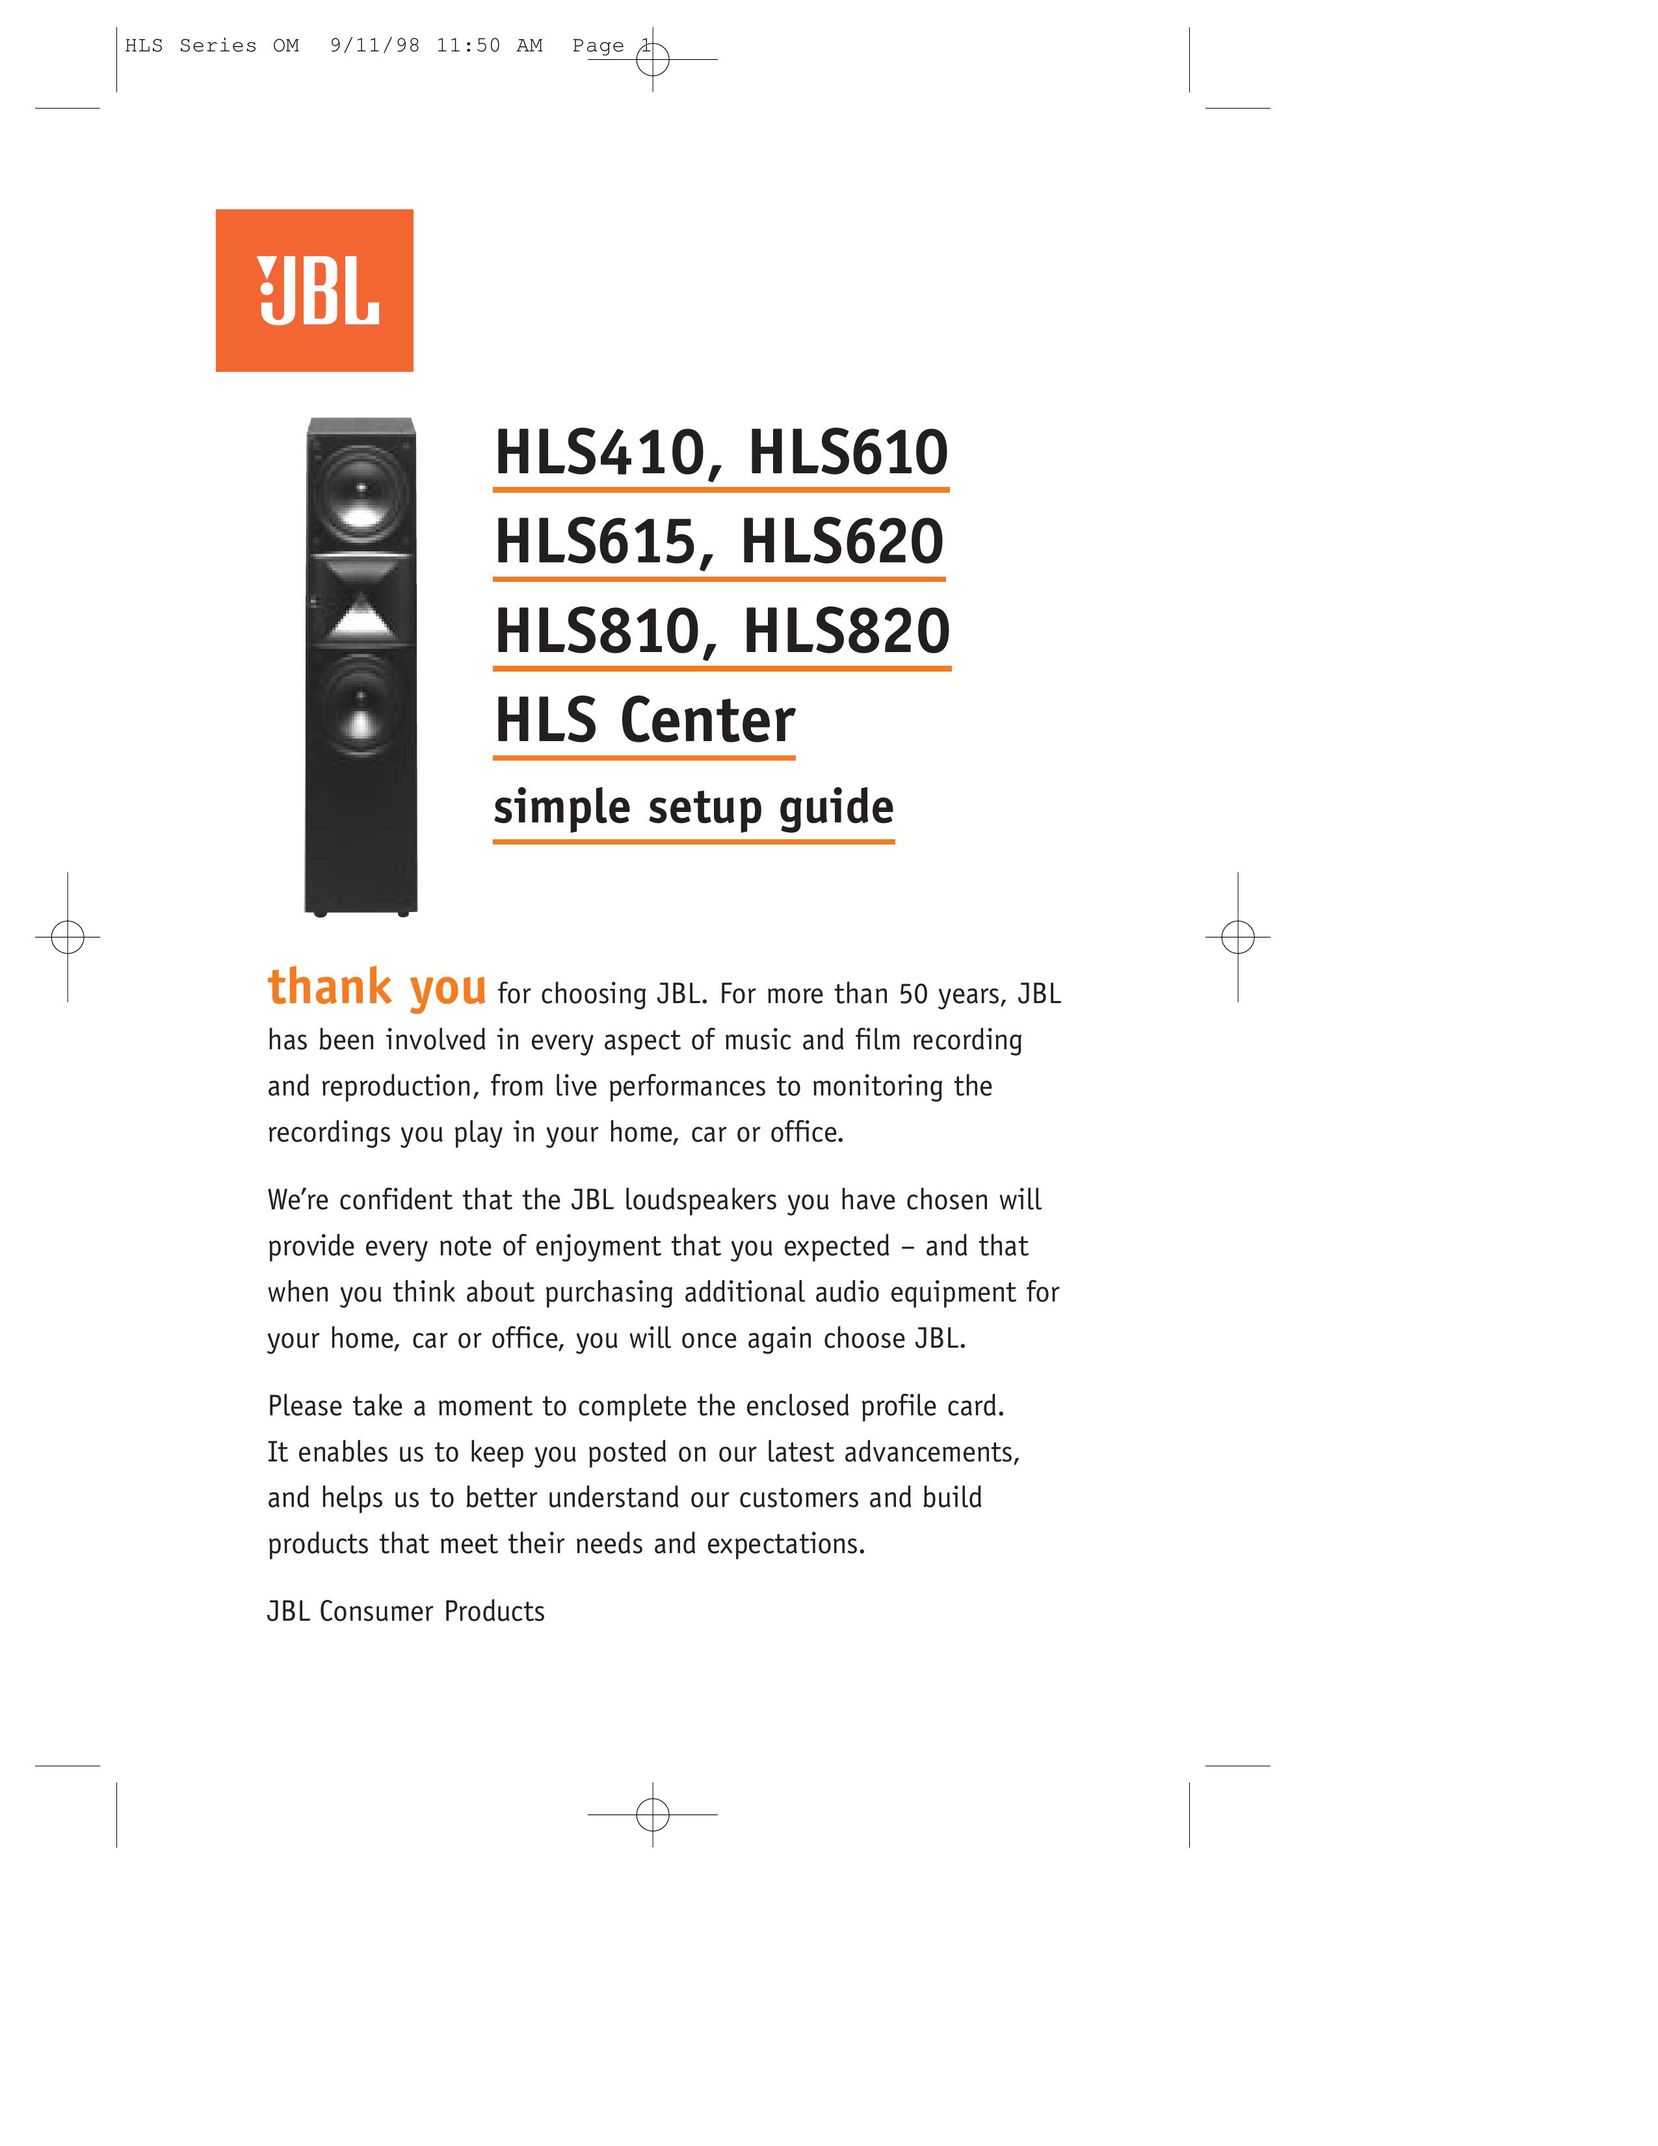 JBL HLS610 Home Theater System User Manual